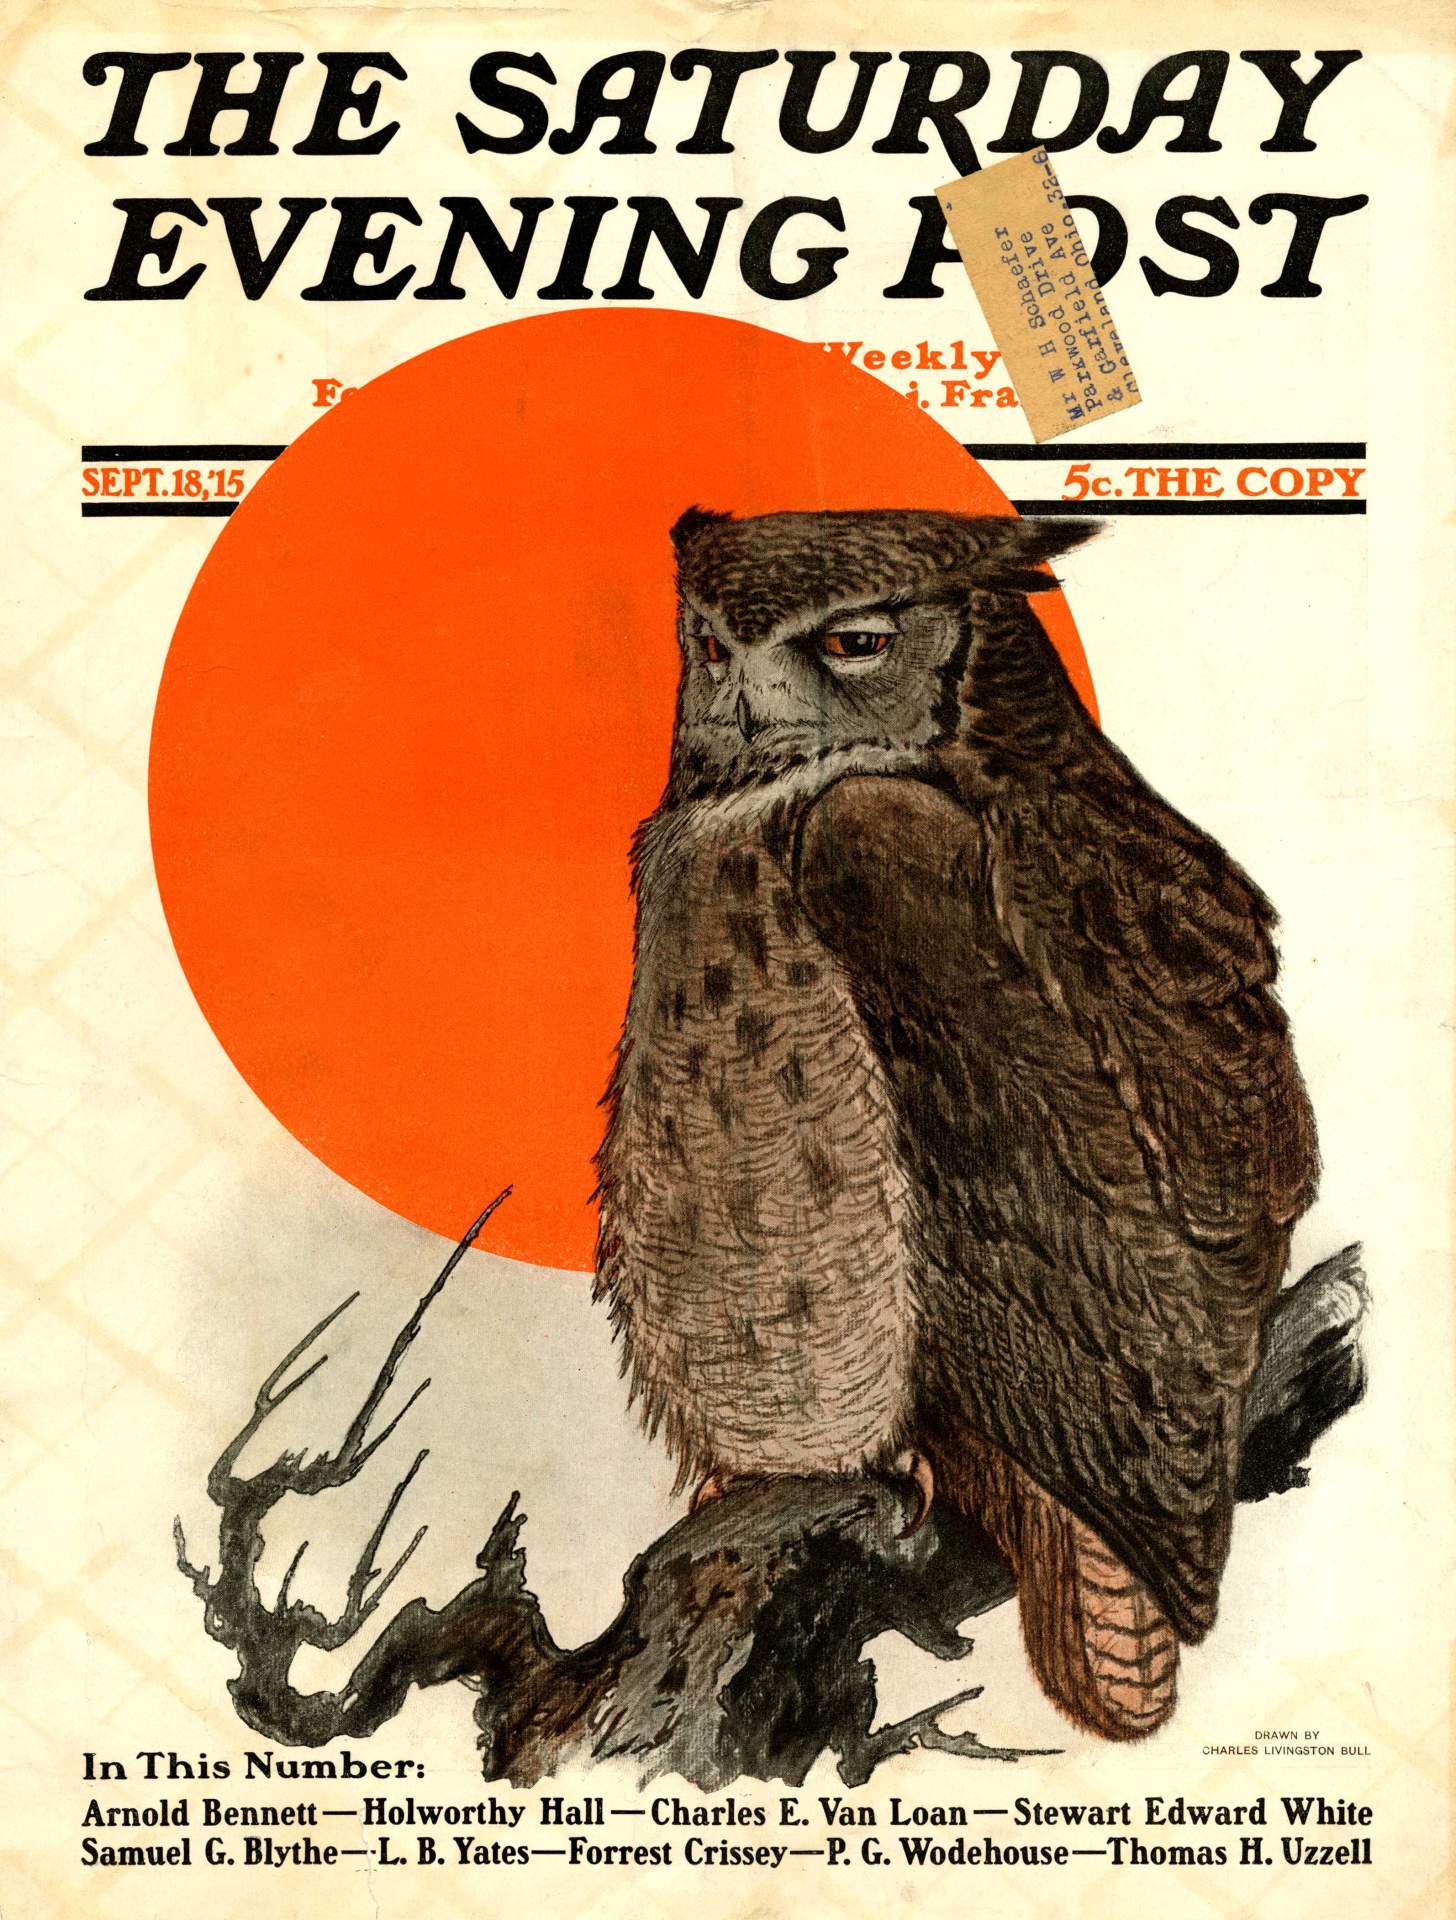 Cover Illustration for The Saturday Evening Post